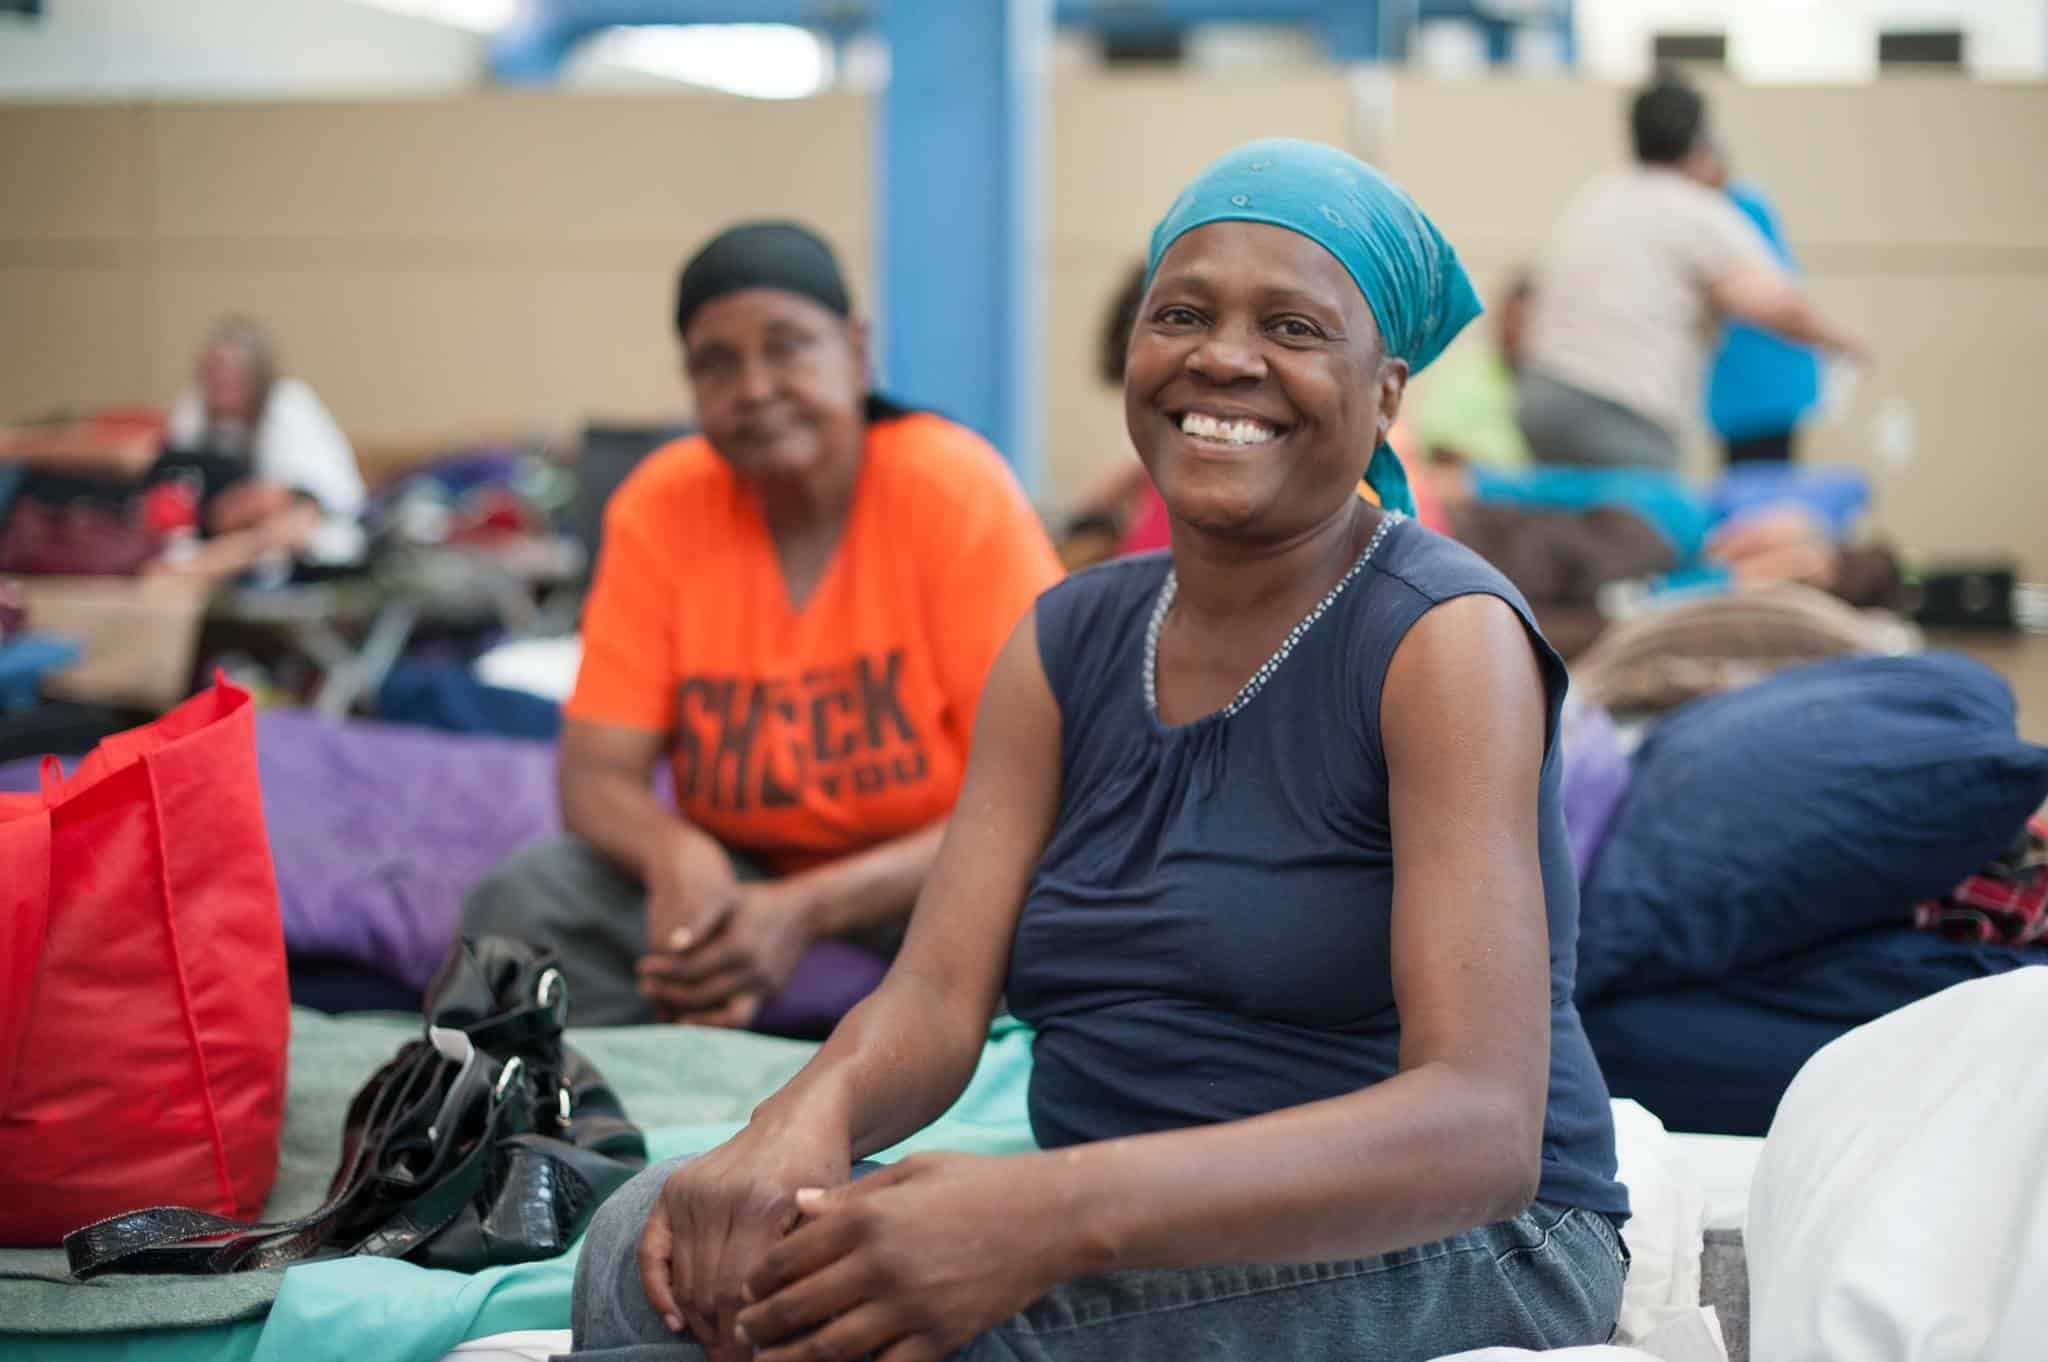 A client from Austin Street Center is smiling while sitting inside the facility.